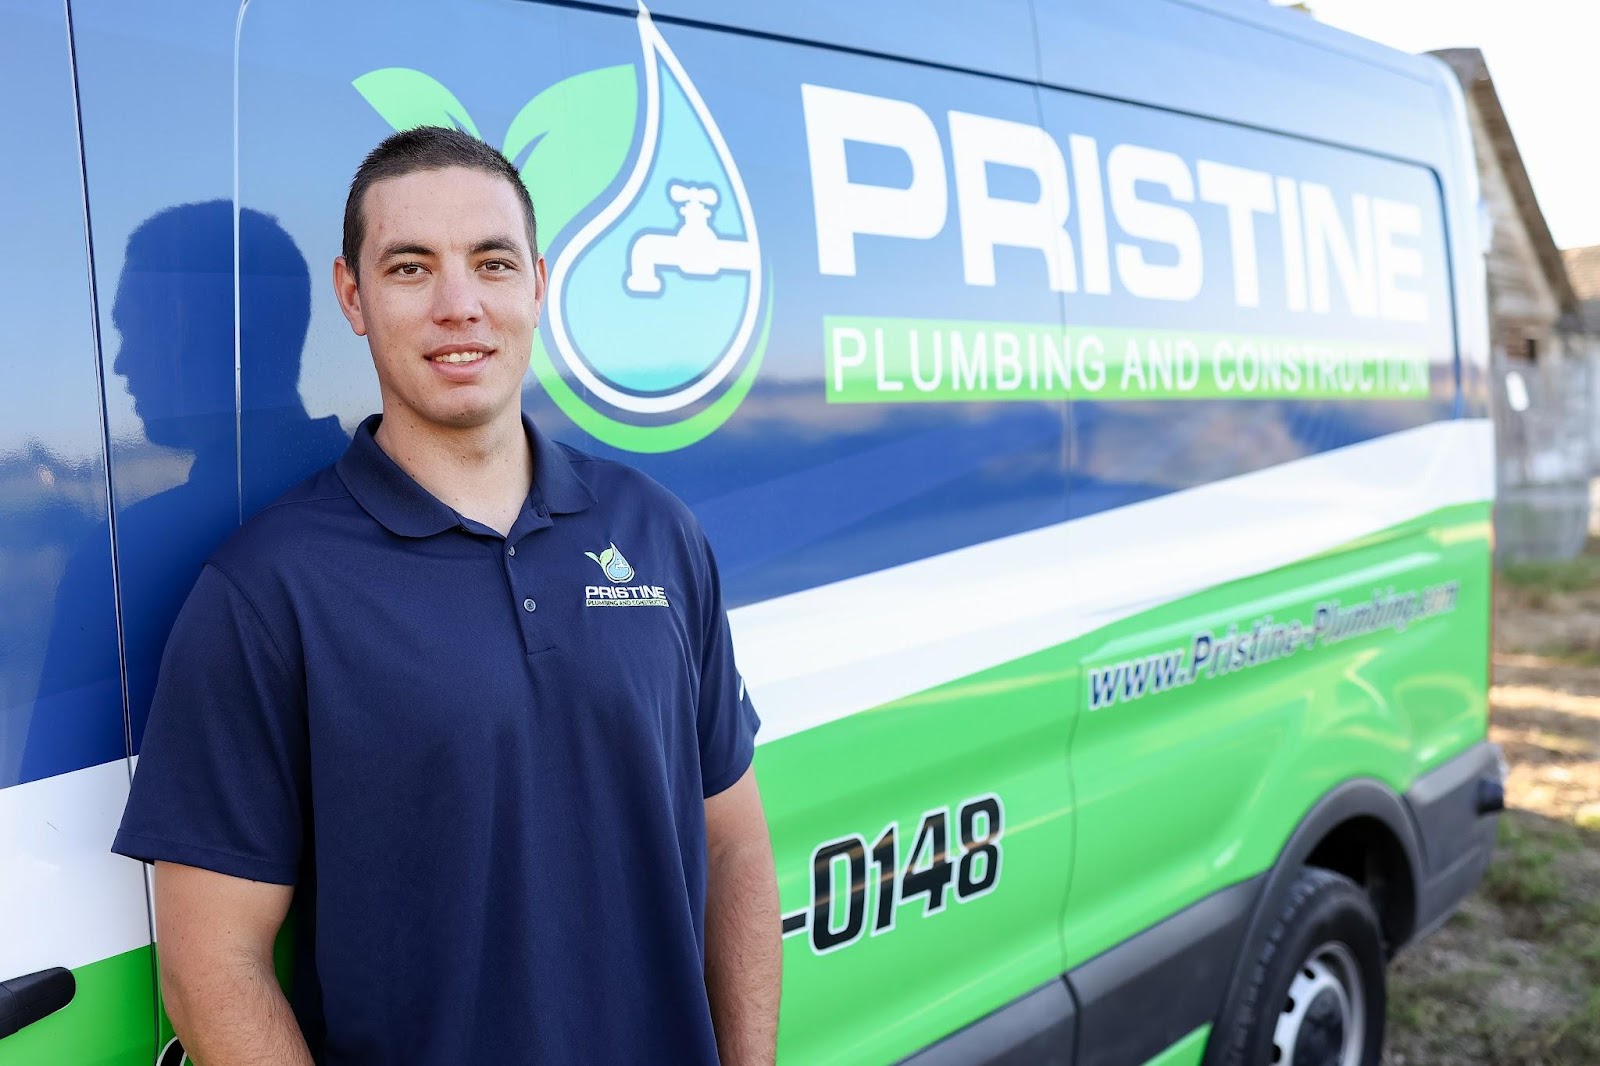 Pristine Plumbing and Construction offers professional plumbing services for the communities in Nampa, Idaho.